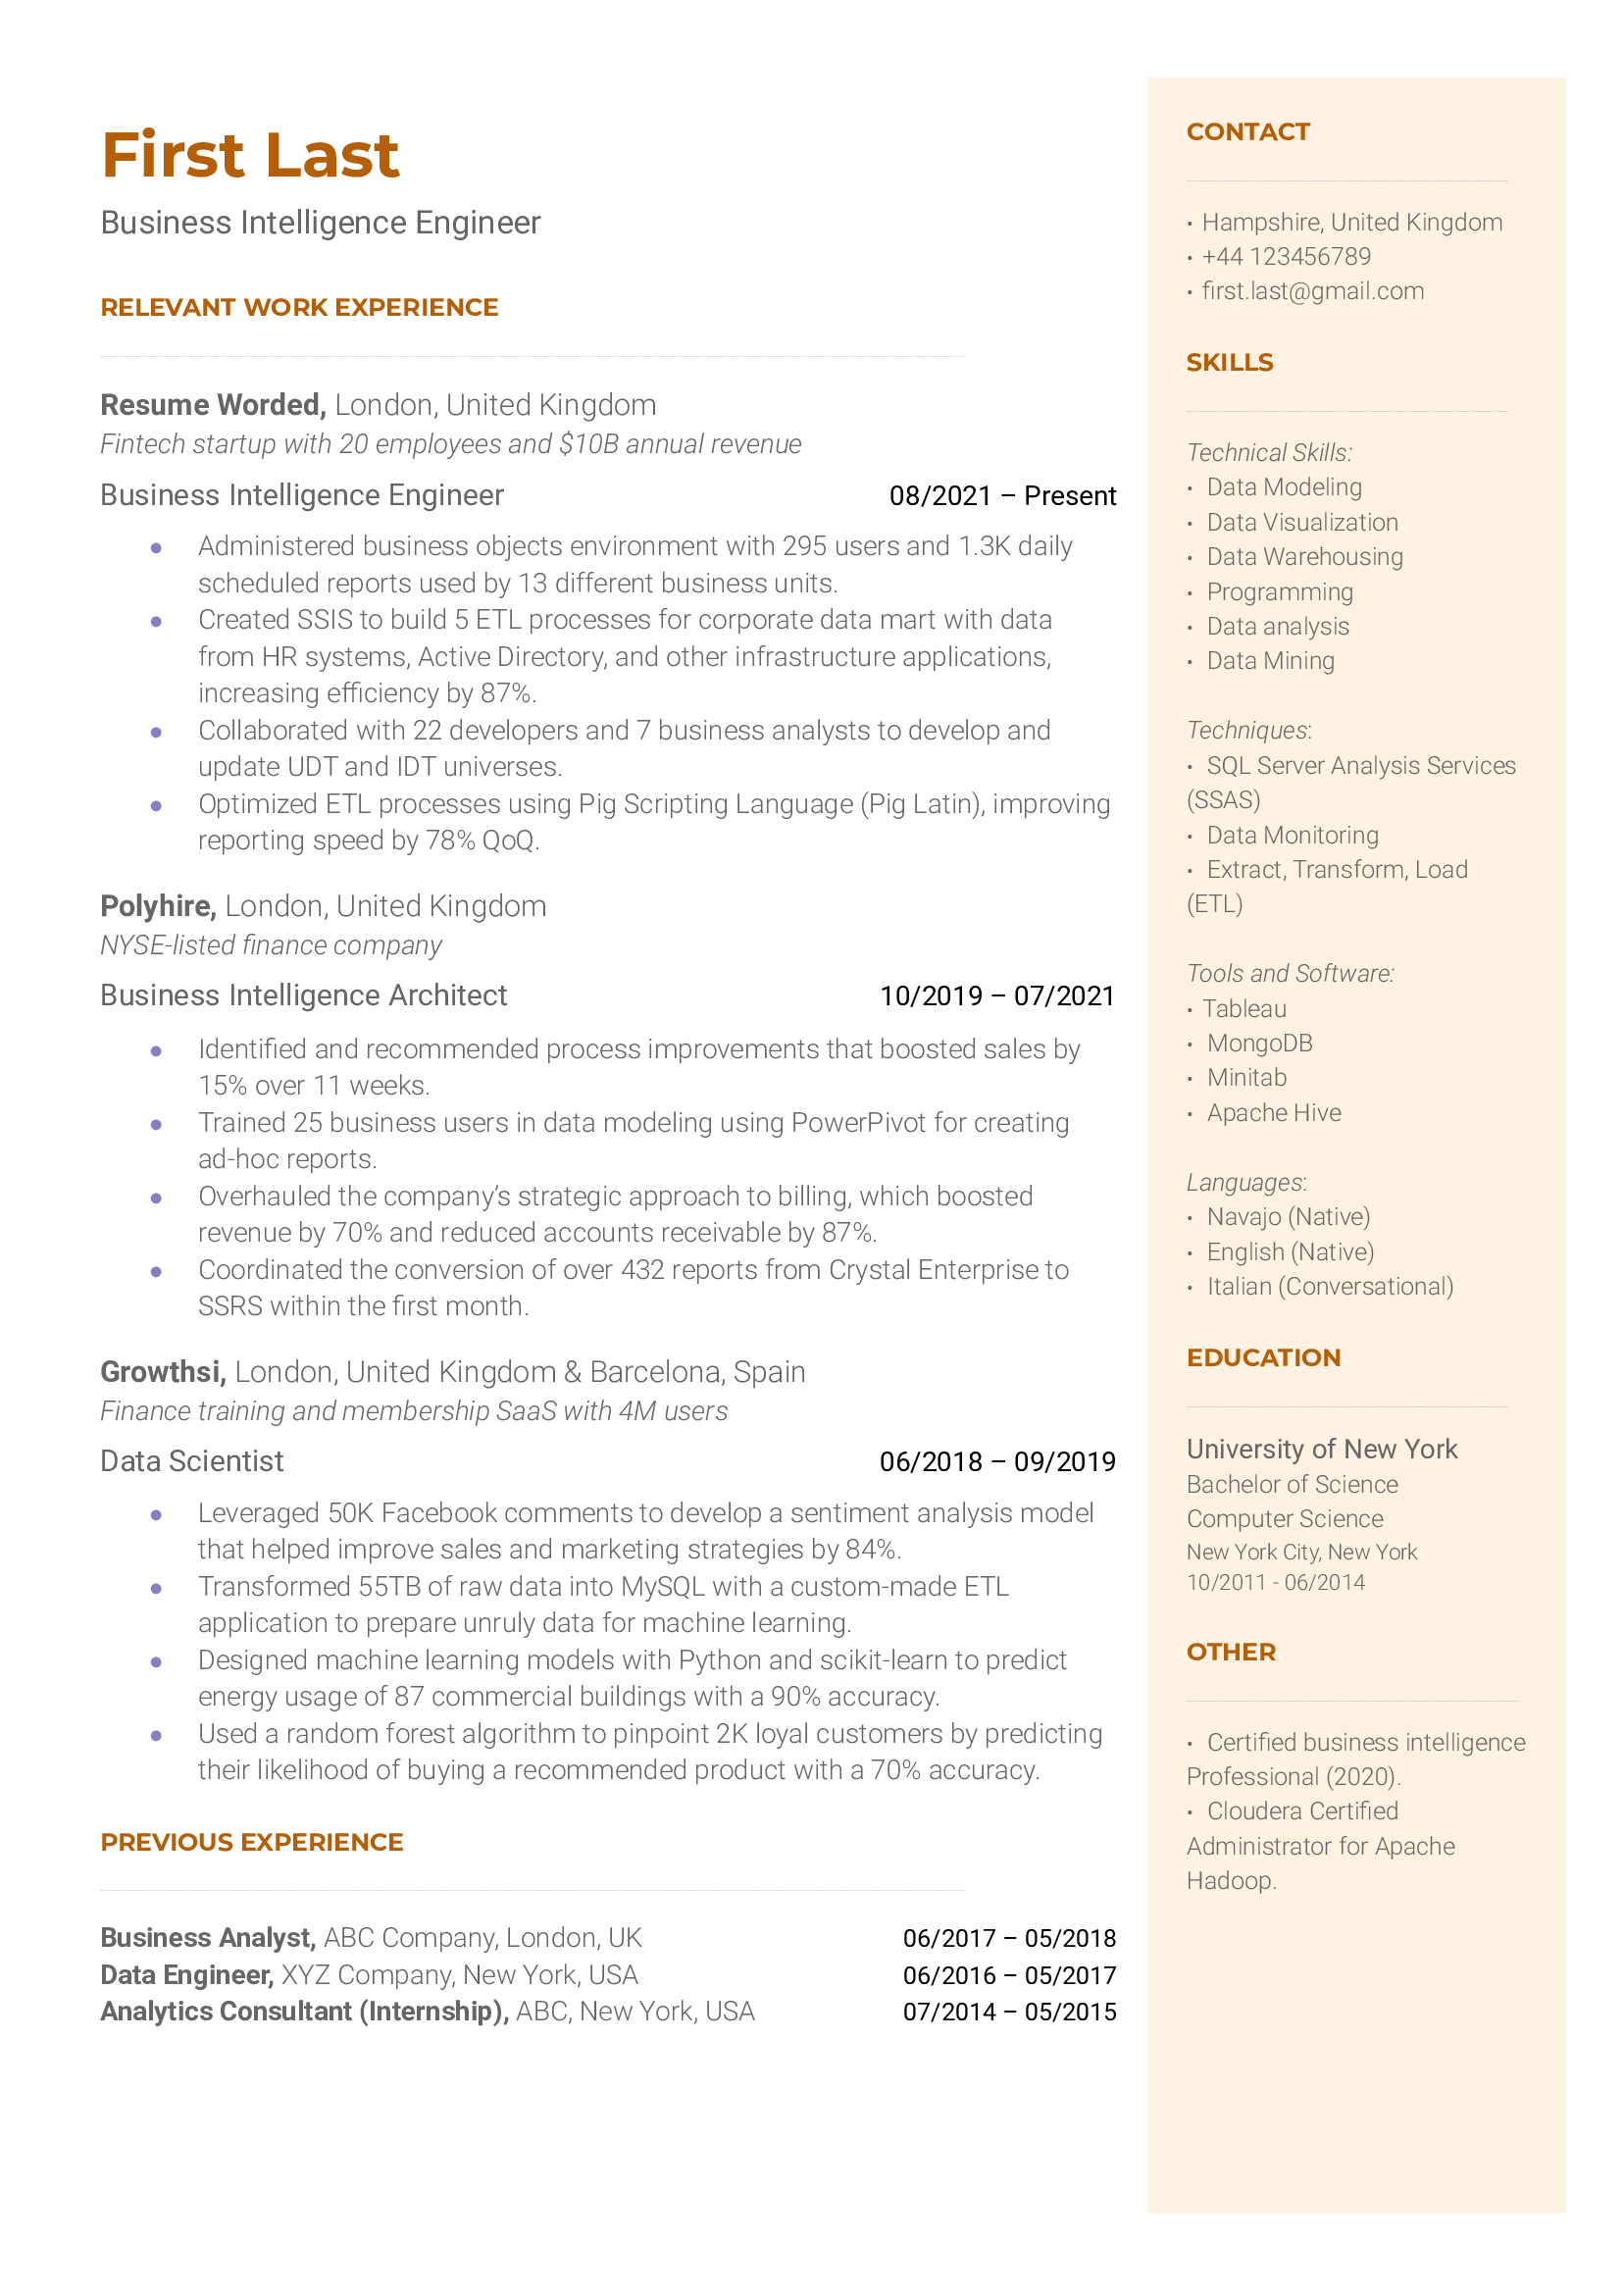 A business intelligence engineer resume with previous experience in data science and business architecture and a degree in computer science.